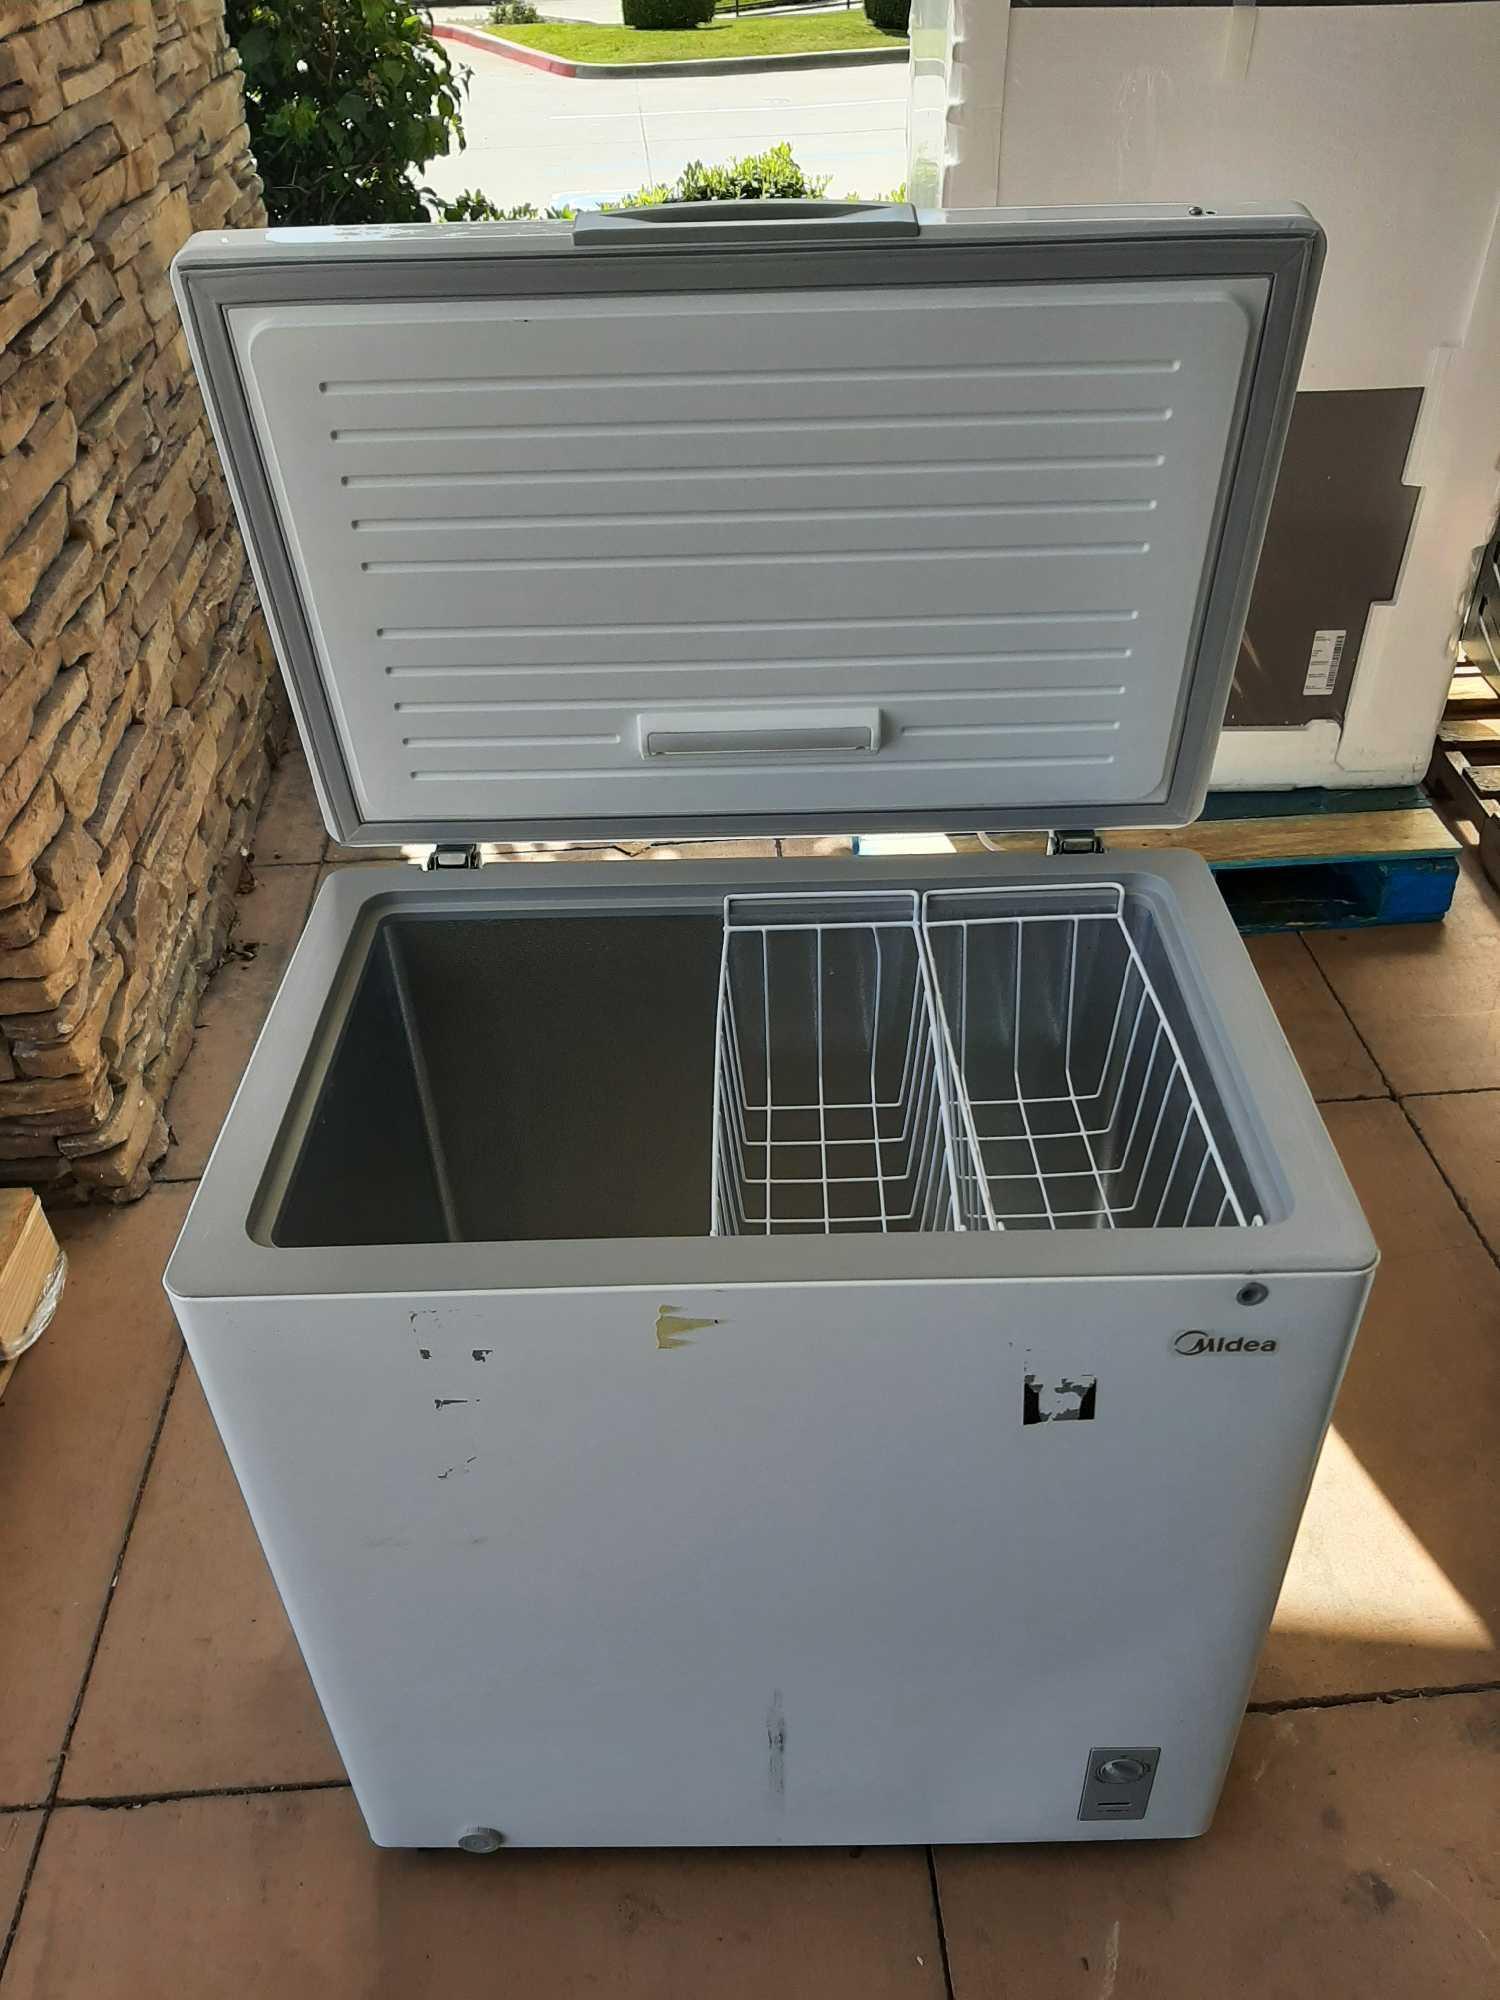 Midea 7.0 cu. ft. Convertible Chest Freezer*COLD*PREVIOUSLY INSTALLED*